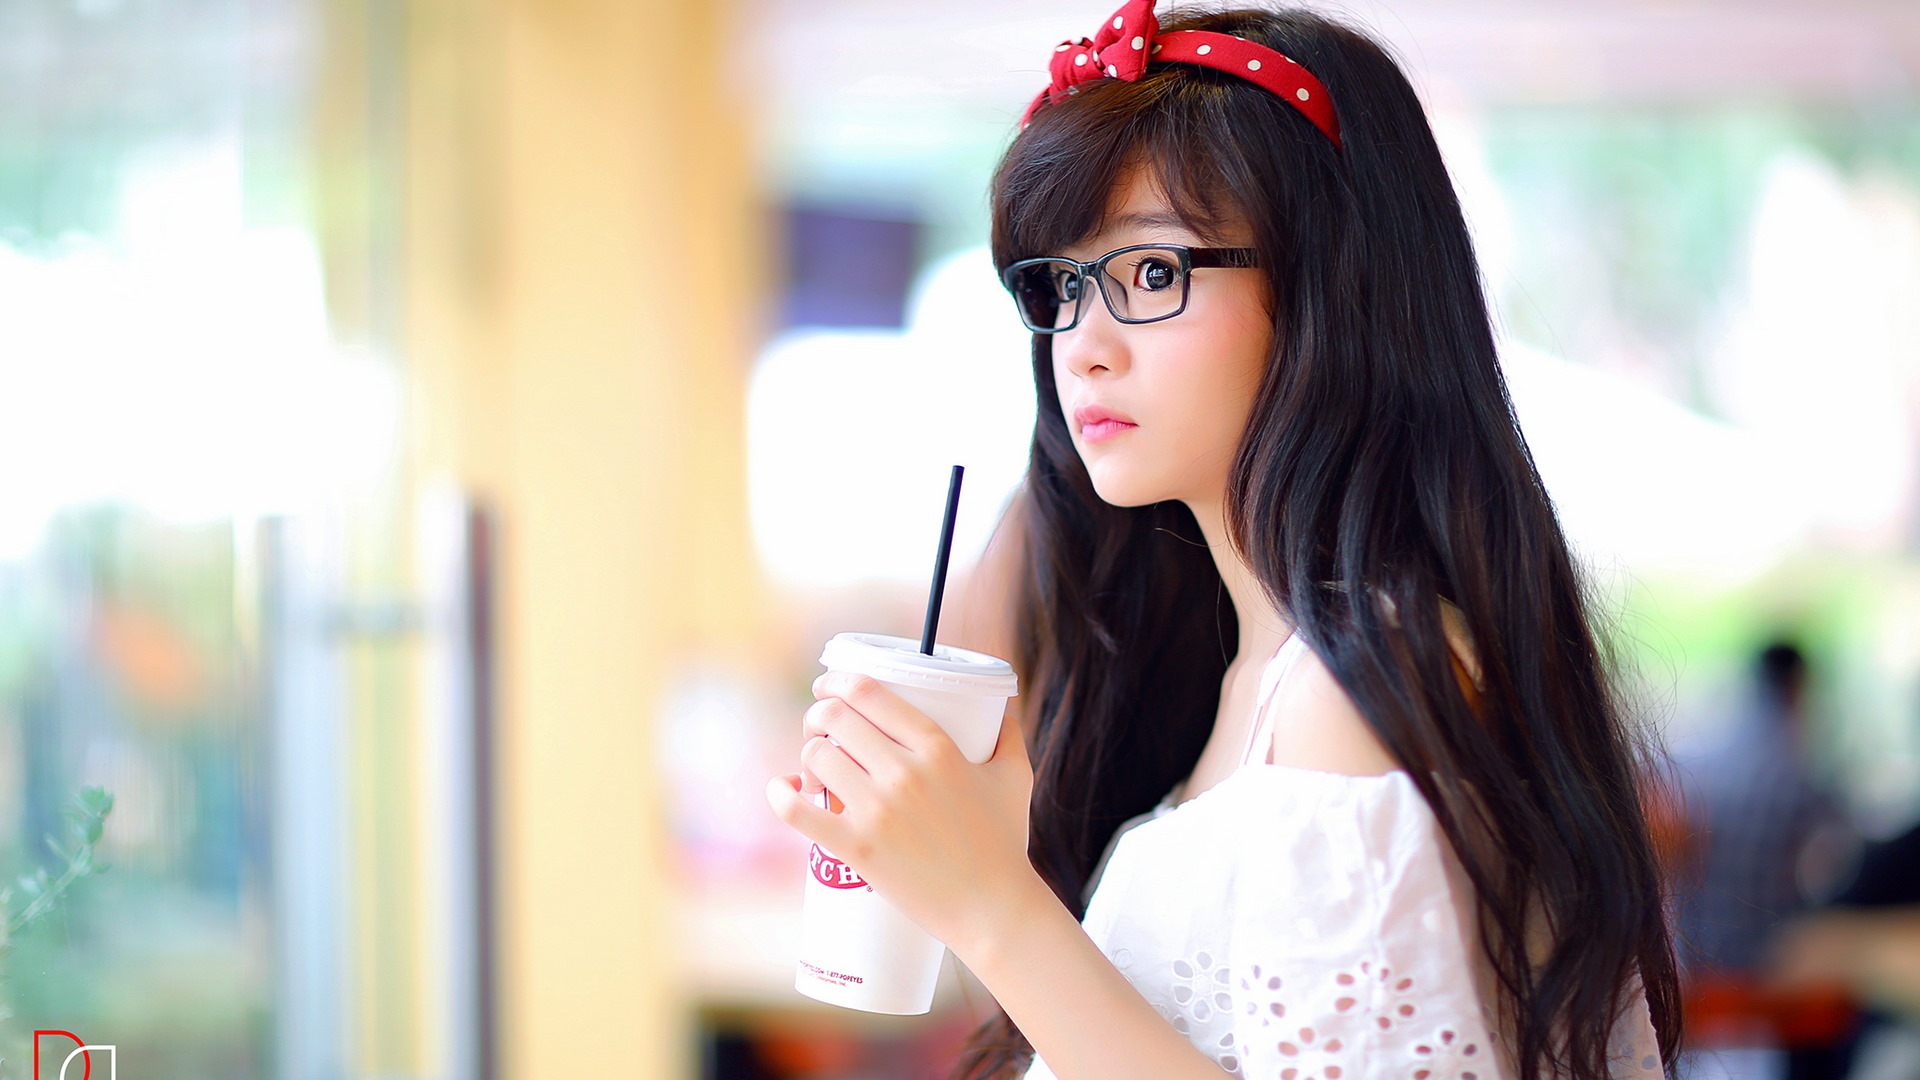 Pure and lovely young Asian girl HD wallpapers collection (3) #32 - 1920x1080